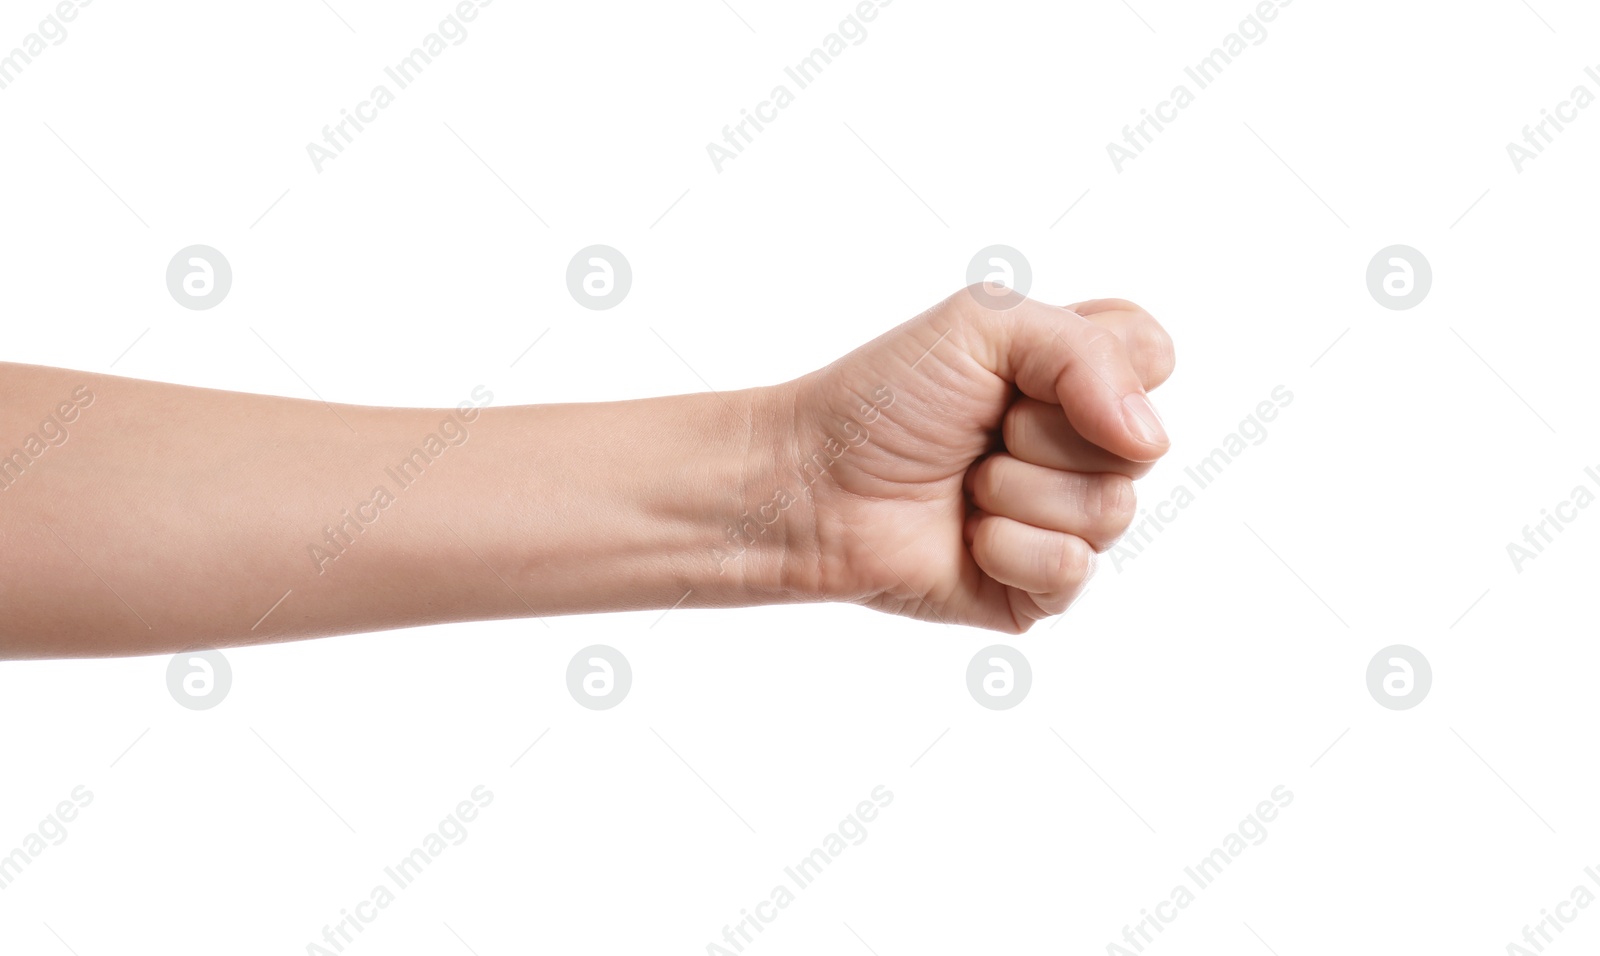 Photo of Woman showing fist on white background, closeup of hand